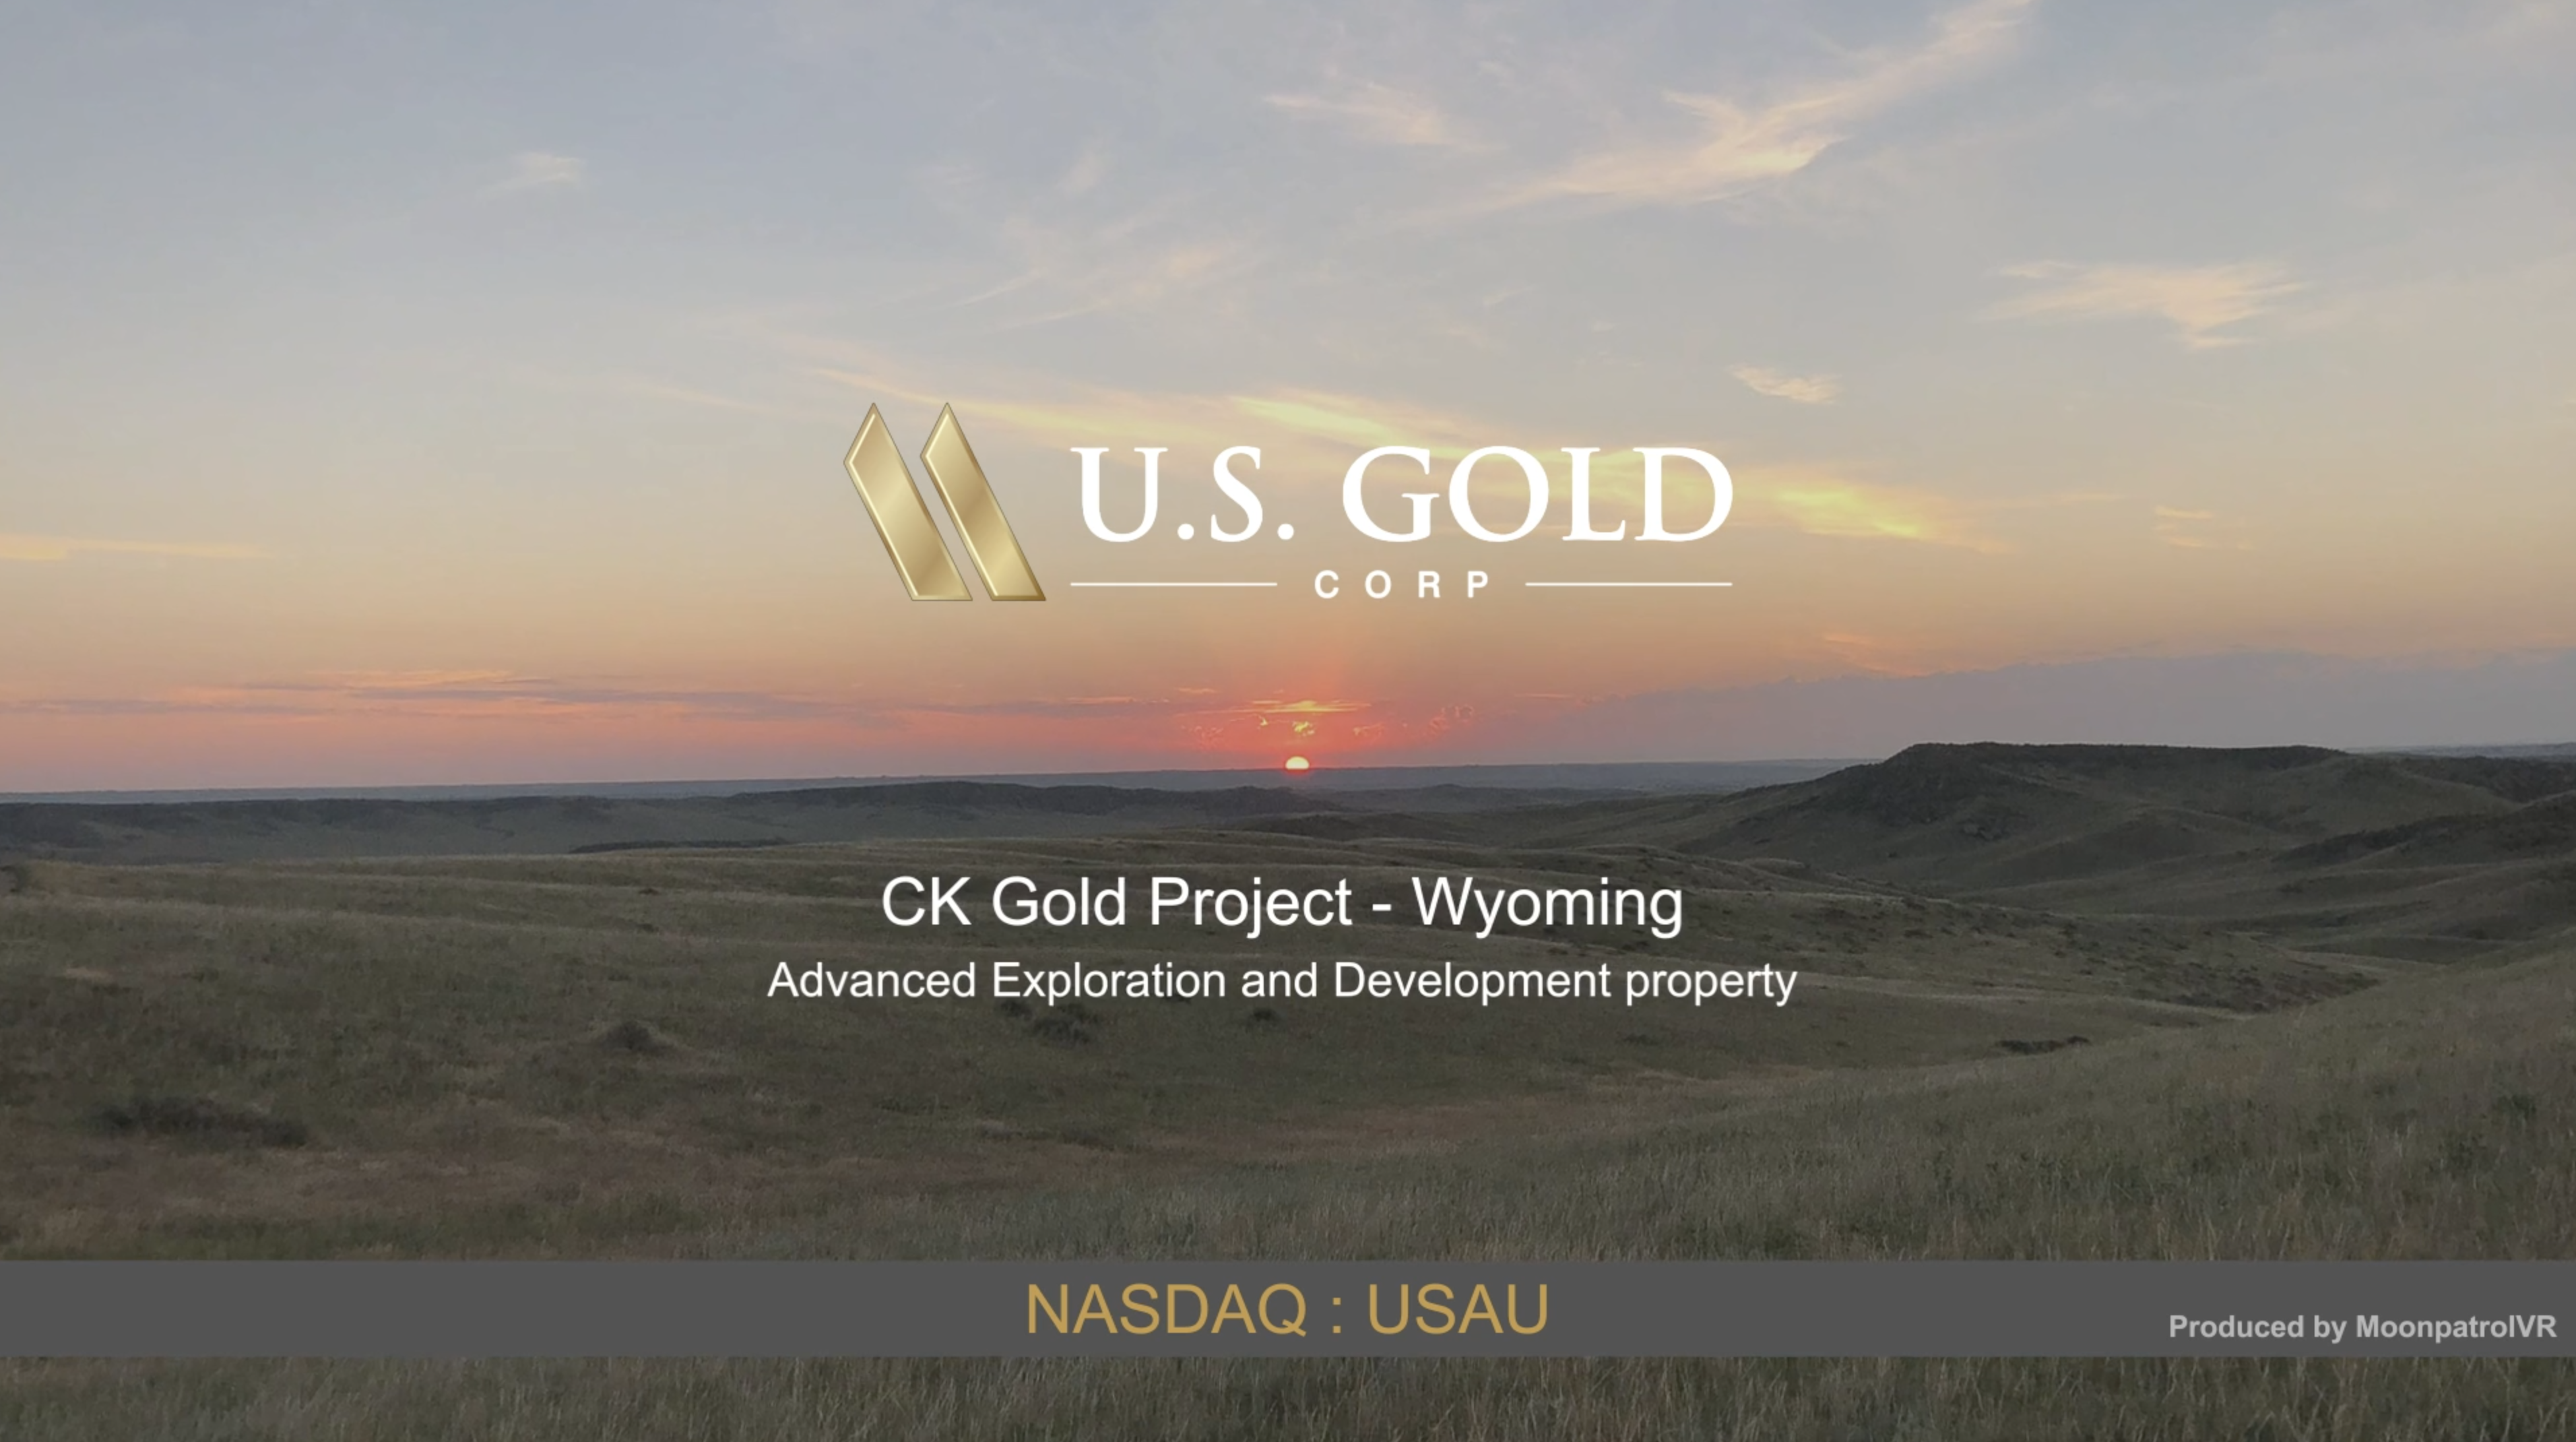 U.S. Gold Corp Key Projects Expose Value Proposition As Gold and Copper Prices Hover Record Levels (NASDAQ: USAU)